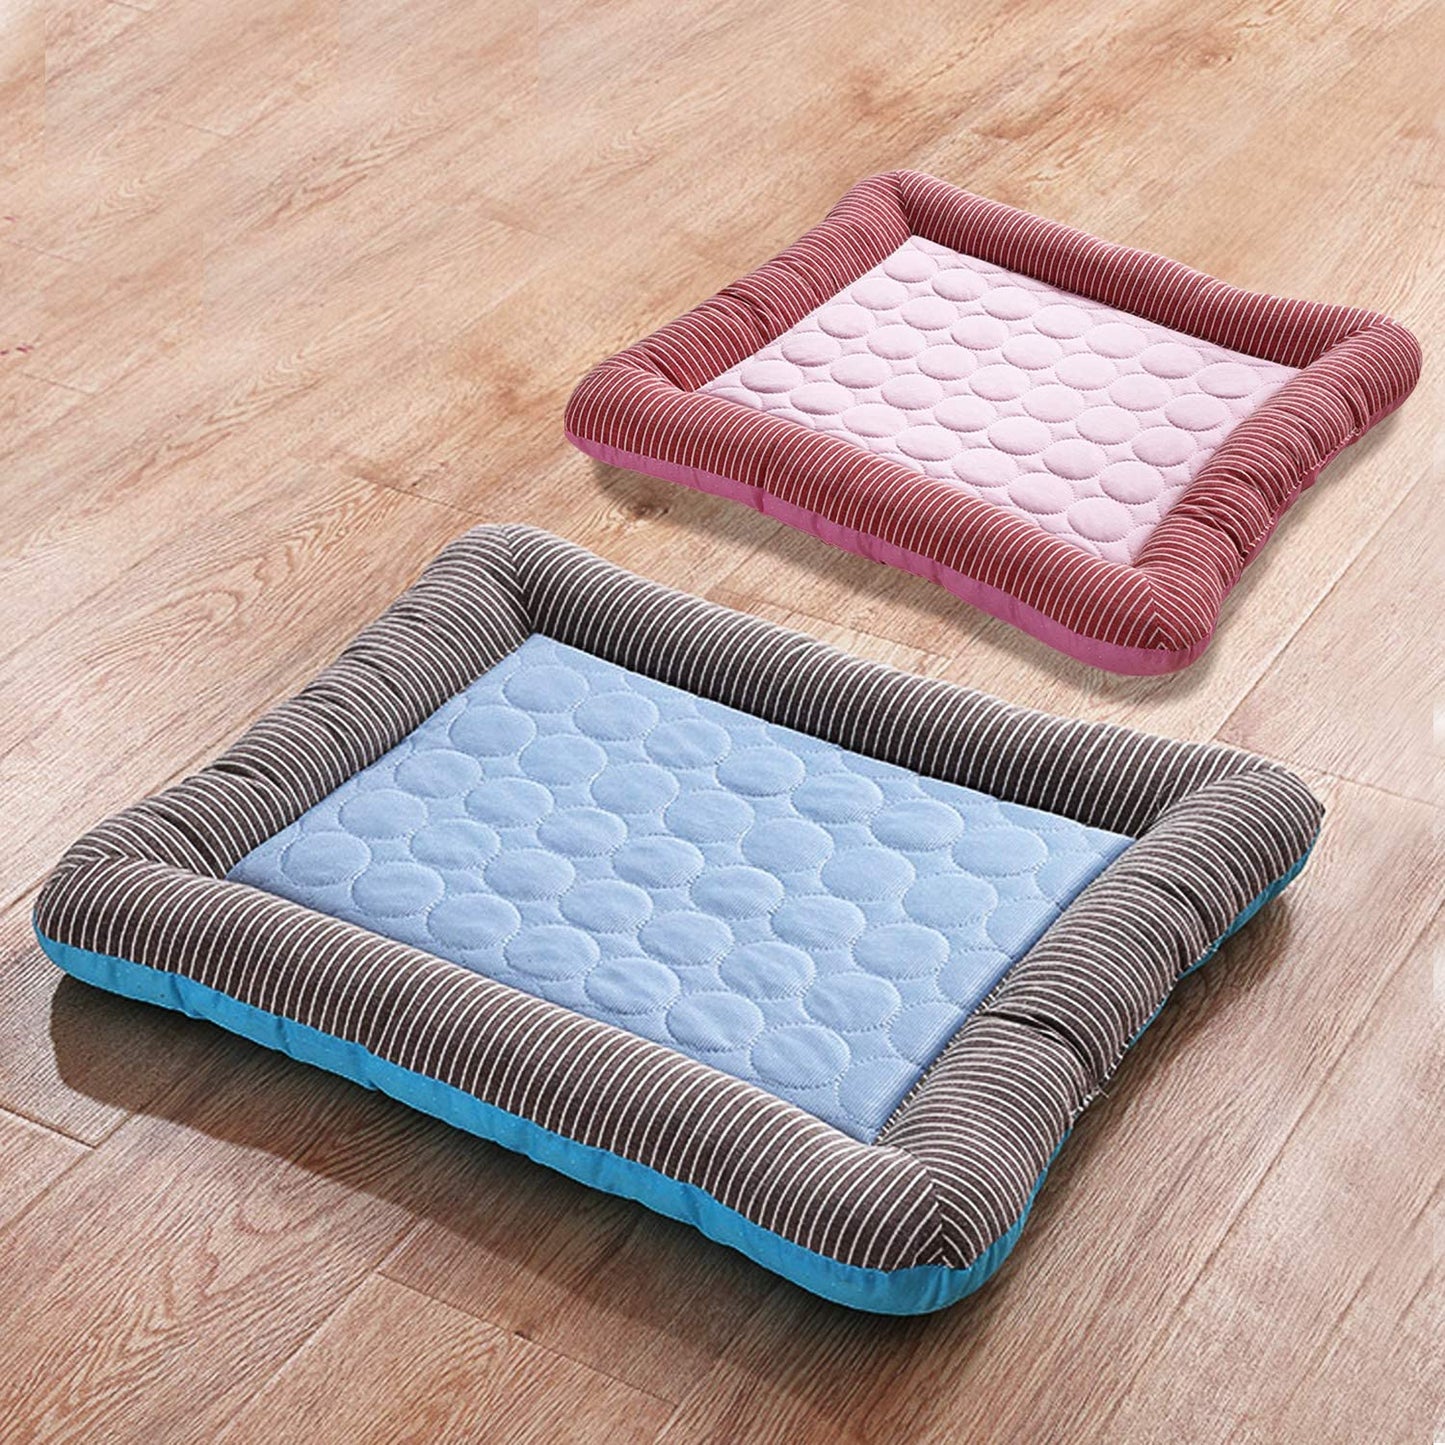 Cooling Pad Dog Bed Cat Bed for Summer Sleeping